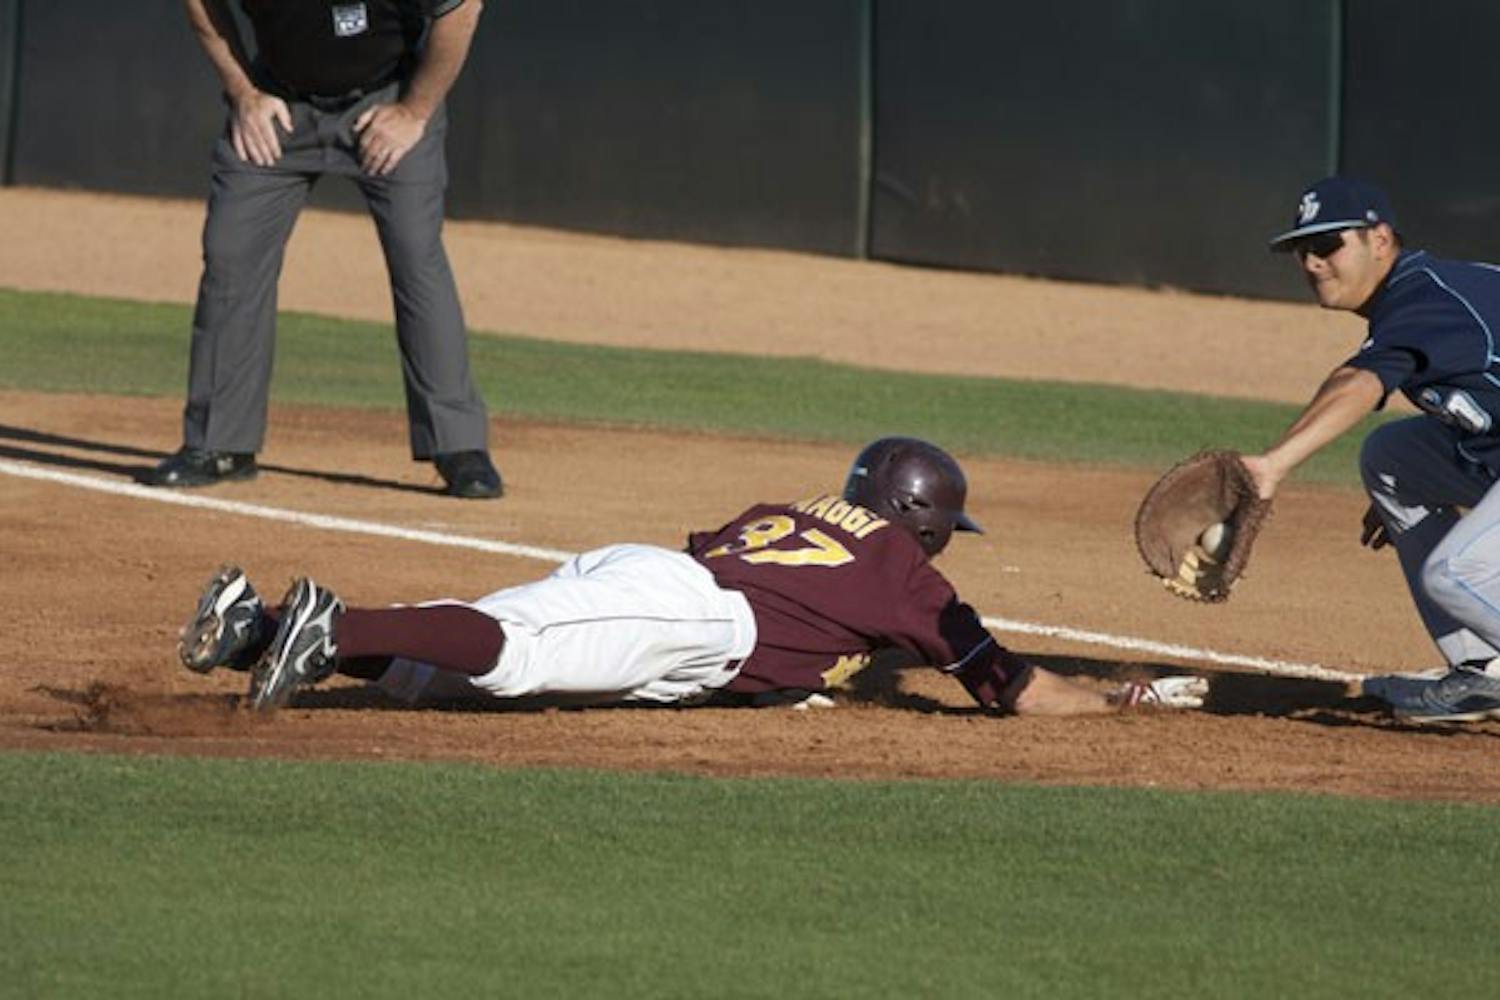 DIVING BACK: ASU sophomore shortstop Drew Maggi gets back to first base on a pickoff attempt during the Sun Devils’11-6 win over San Diego earlier this month. Maggi and the Sun Devils are currently tied for first in the Pac-10 and ranked No. 3 in the nation by Baseball America. (Photo by Scott Stuk)